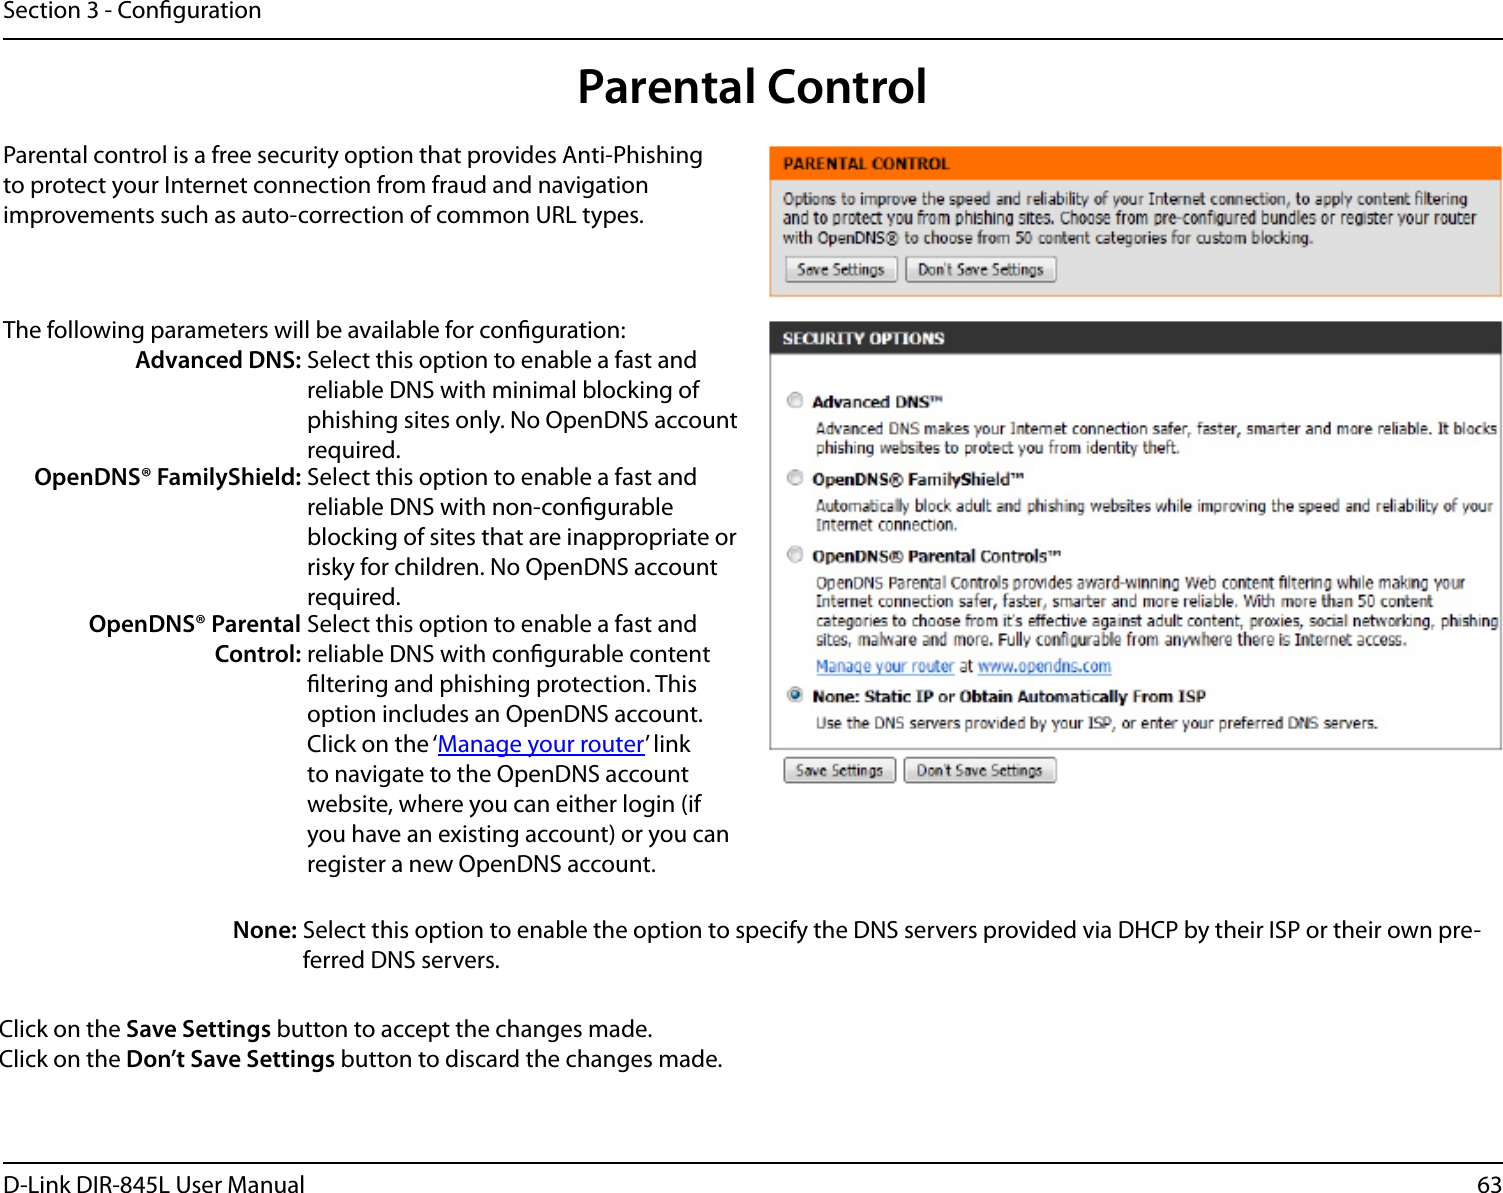 63D-Link DIR-845L User ManualSection 3 - CongurationParental ControlParental control is a free security option that provides Anti-Phishing to protect your Internet connection from fraud and navigation improvements such as auto-correction of common URL types.The following parameters will be available for conguration:Advanced DNS: Select this option to enable a fast and reliable DNS with minimal blocking of phishing sites only. No OpenDNS account required.OpenDNS® FamilyShield: Select this option to enable a fast and reliable DNS with non-congurable blocking of sites that are inappropriate or risky for children. No OpenDNS account required.OpenDNS® Parental Control:Select this option to enable a fast and reliable DNS with congurable content ltering and phishing protection. This option includes an OpenDNS account. Click on the ‘Manage your router’ link to navigate to the OpenDNS account website, where you can either login (if you have an existing account) or you can register a new OpenDNS account. None: Select this option to enable the option to specify the DNS servers provided via DHCP by their ISP or their own pre-ferred DNS servers.Click on the Save Settings button to accept the changes made.Click on the Don’t Save Settings button to discard the changes made.